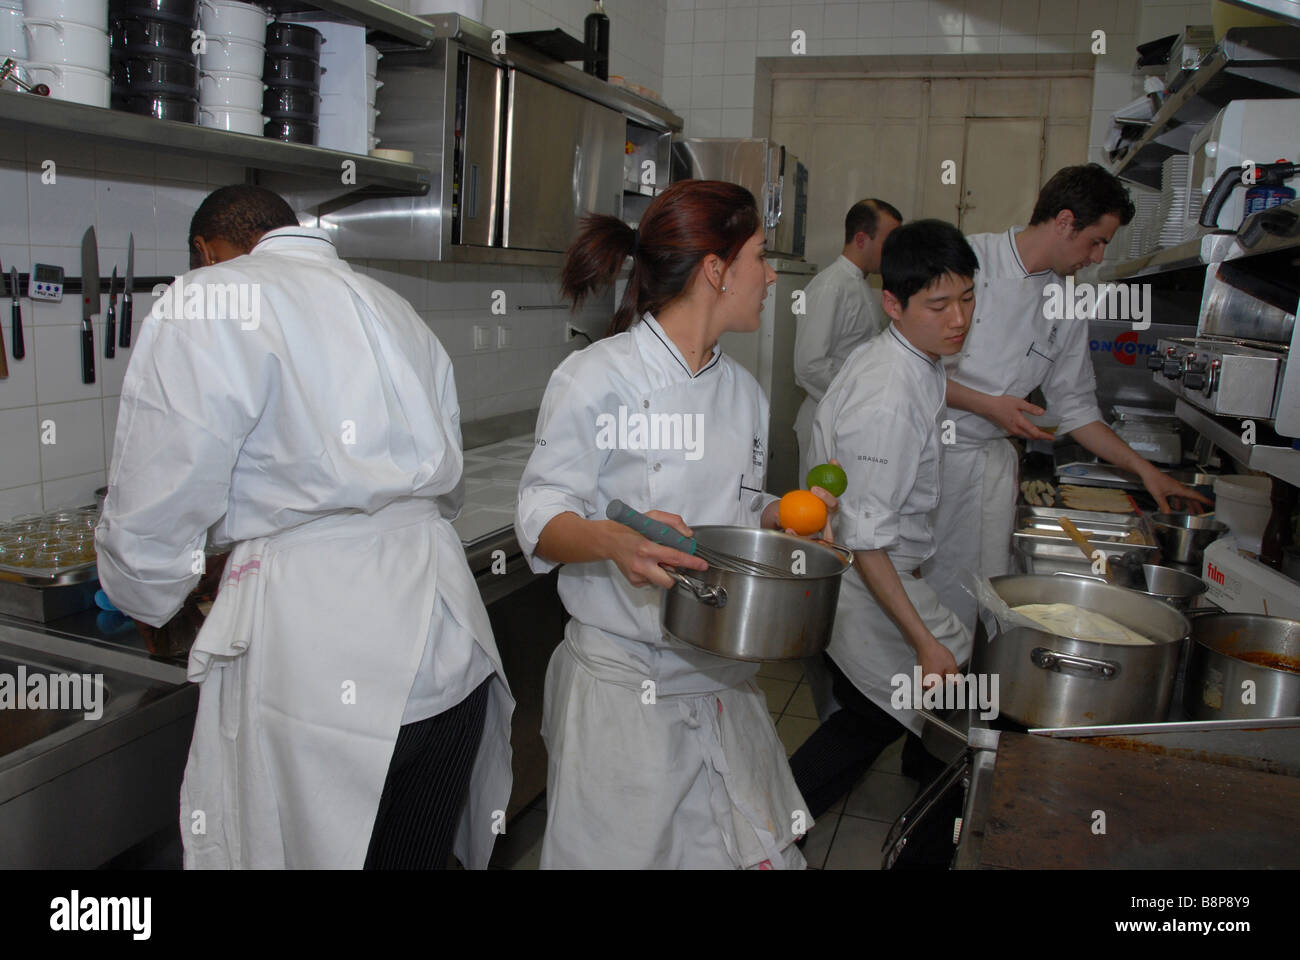 A brigade of chefs preparing meals in a busy kitchen of the Cafe de la Cloche in the old town of Lyon,France Stock Photo